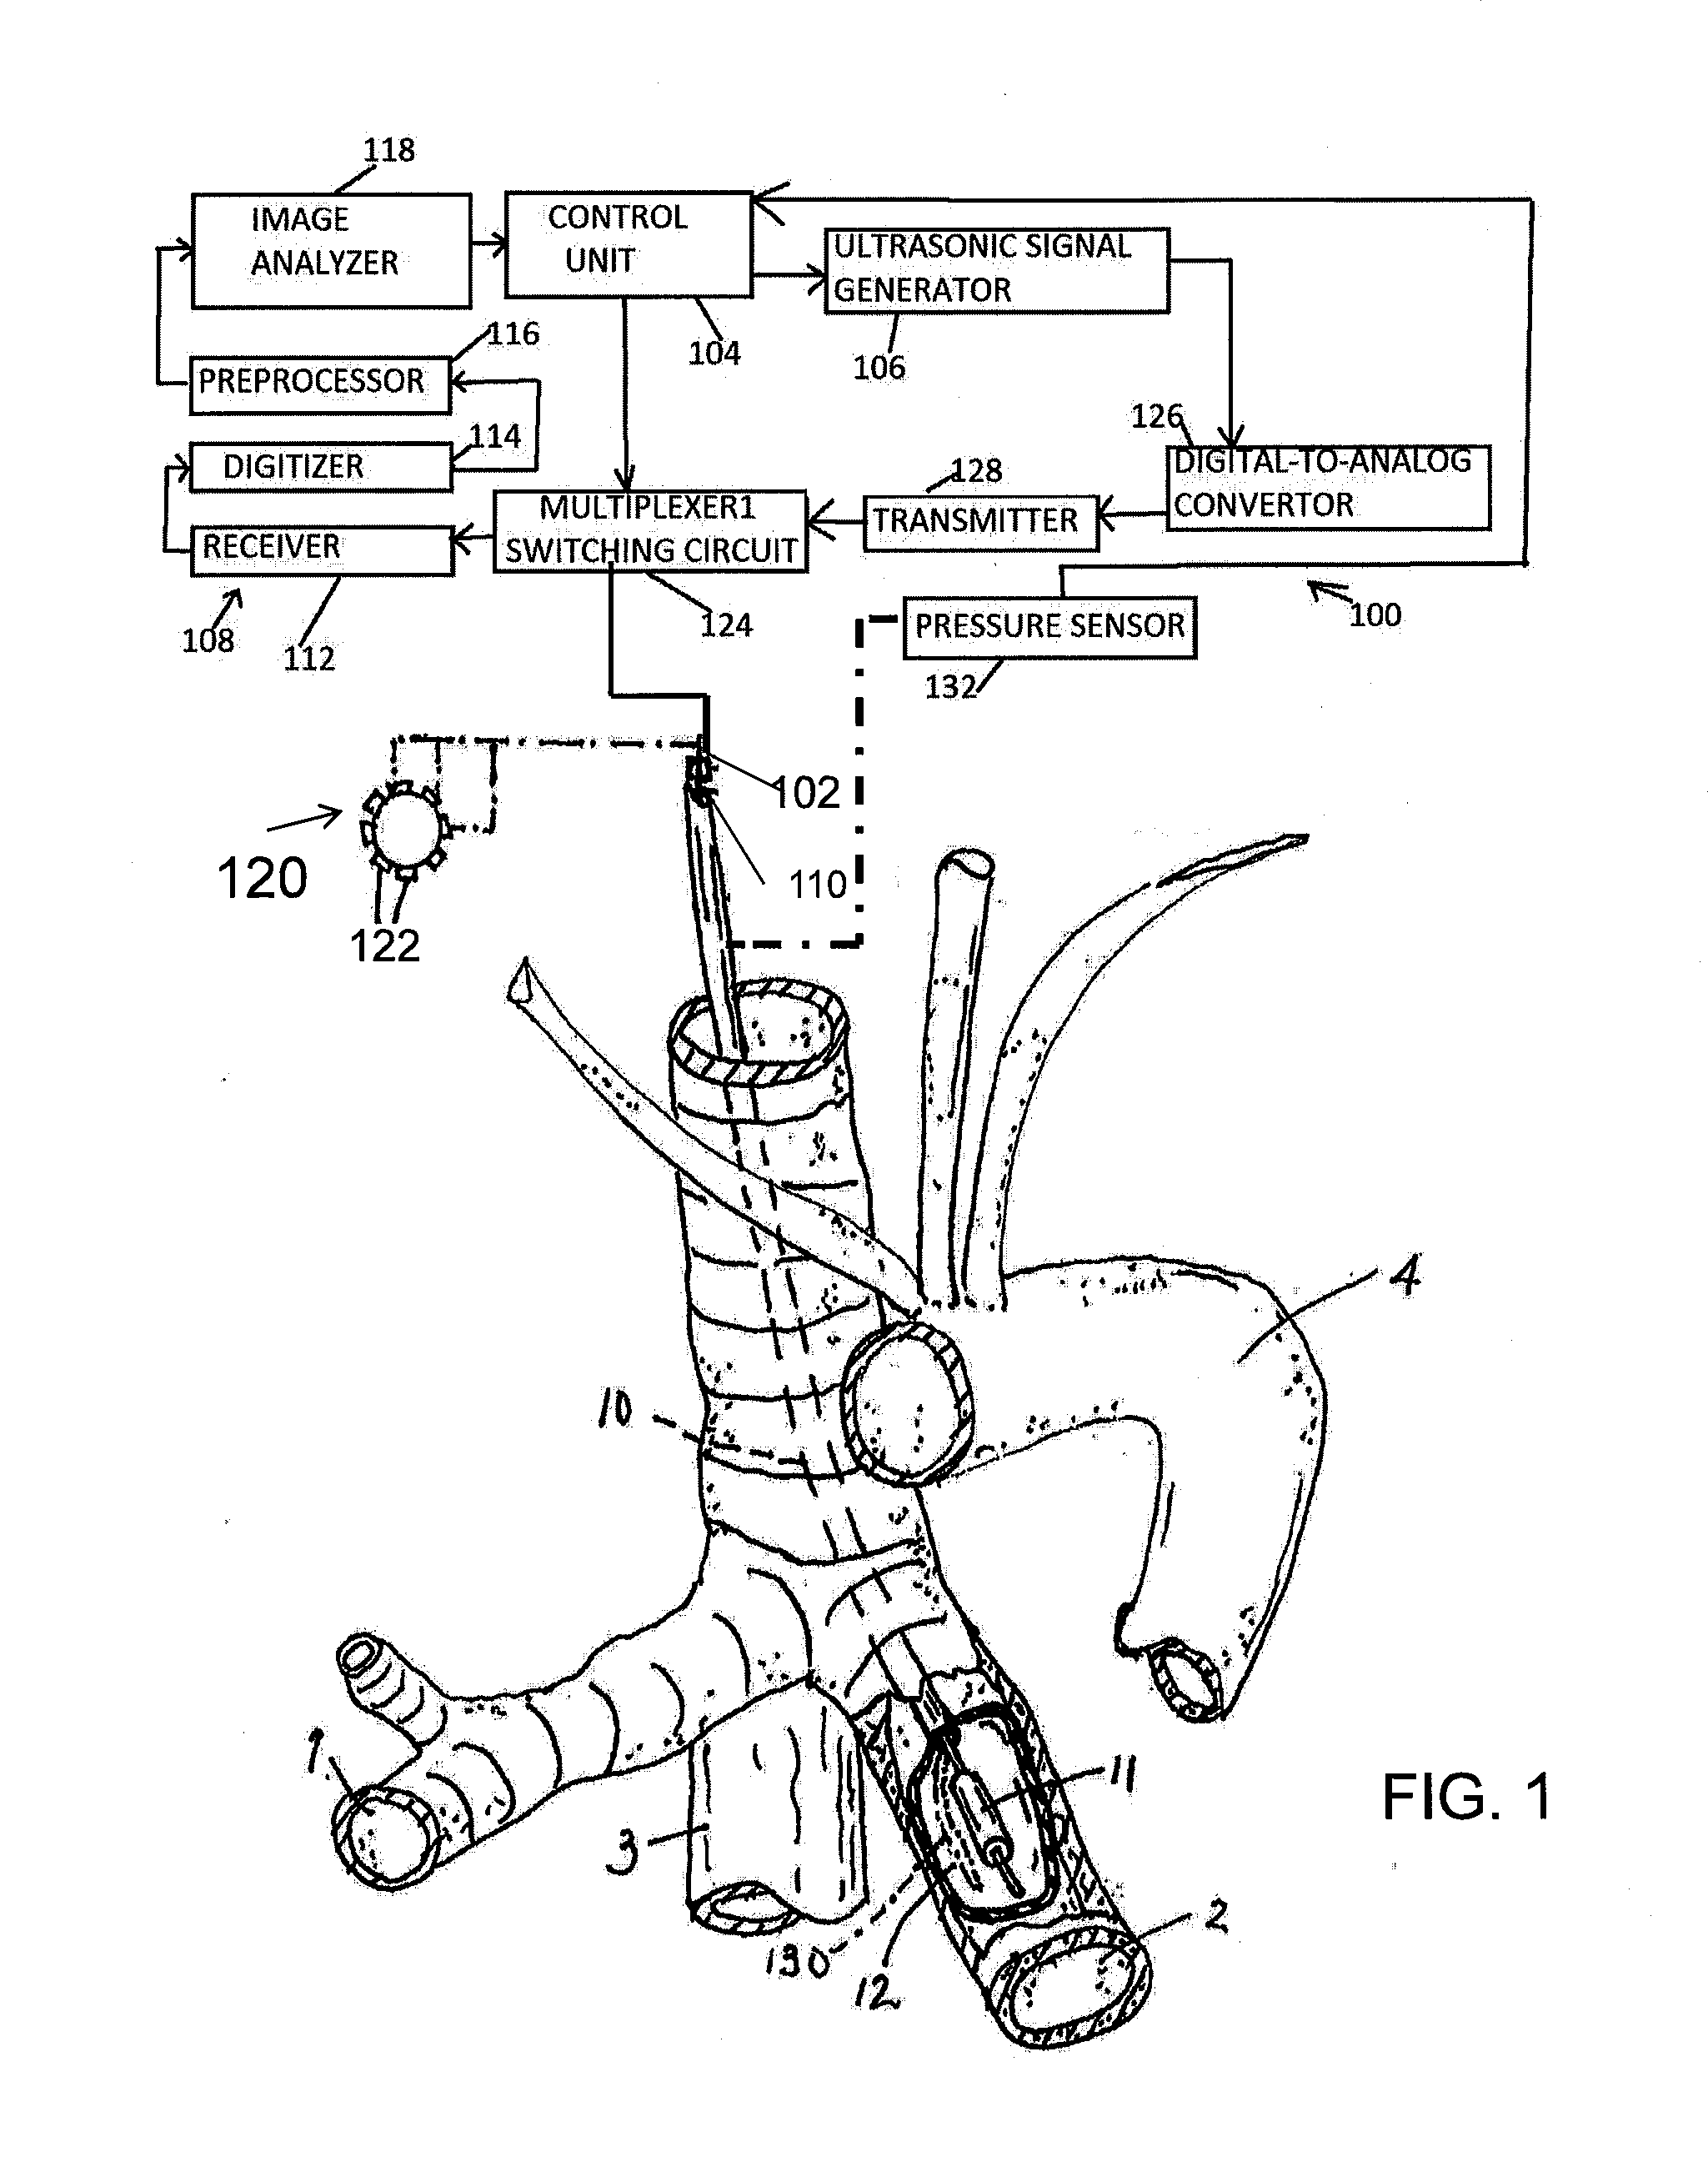 Method and apparatus for performance of thermal bronchiplasty with unfocused ultrasound